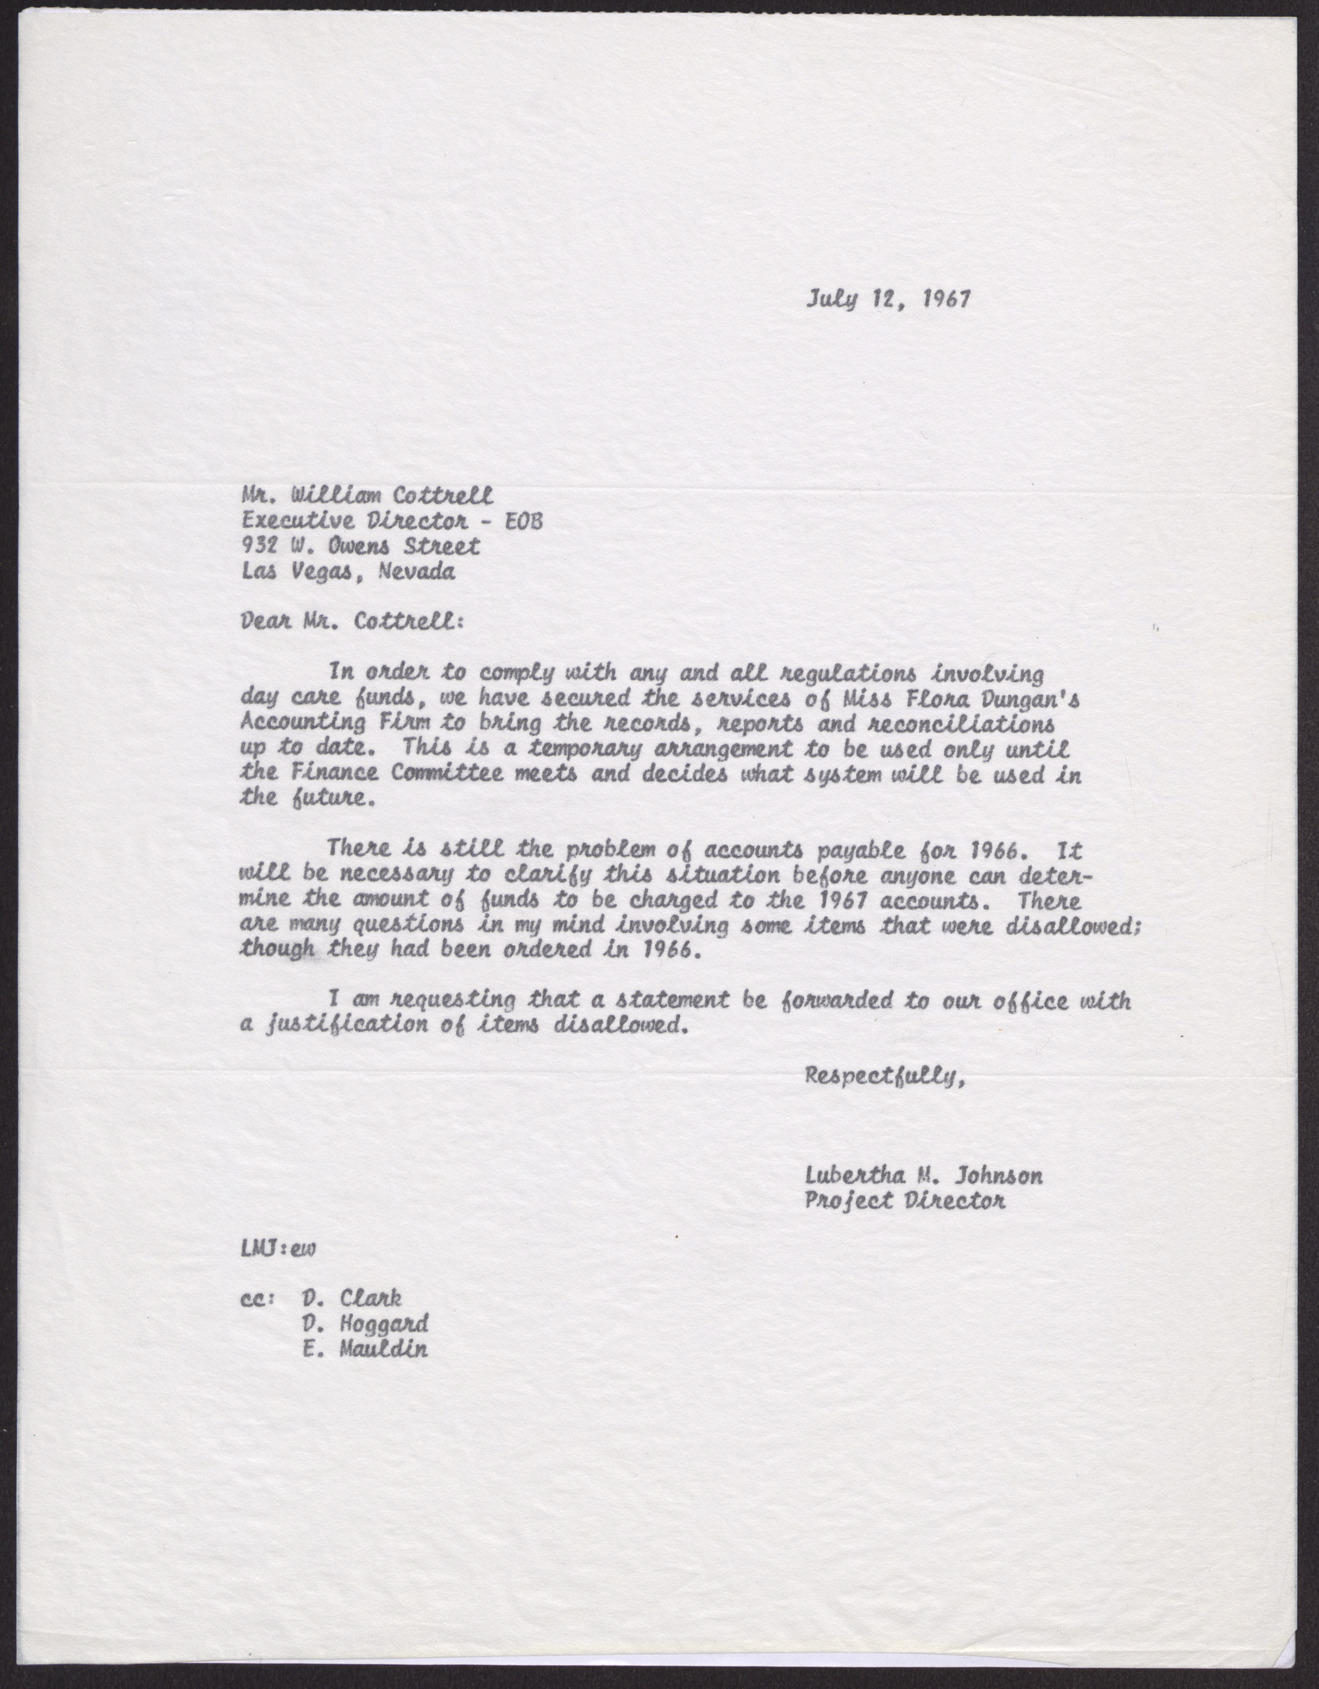 Letter to Mr. William Cottrell from Lubertha M. Johnson, July 12, 1967